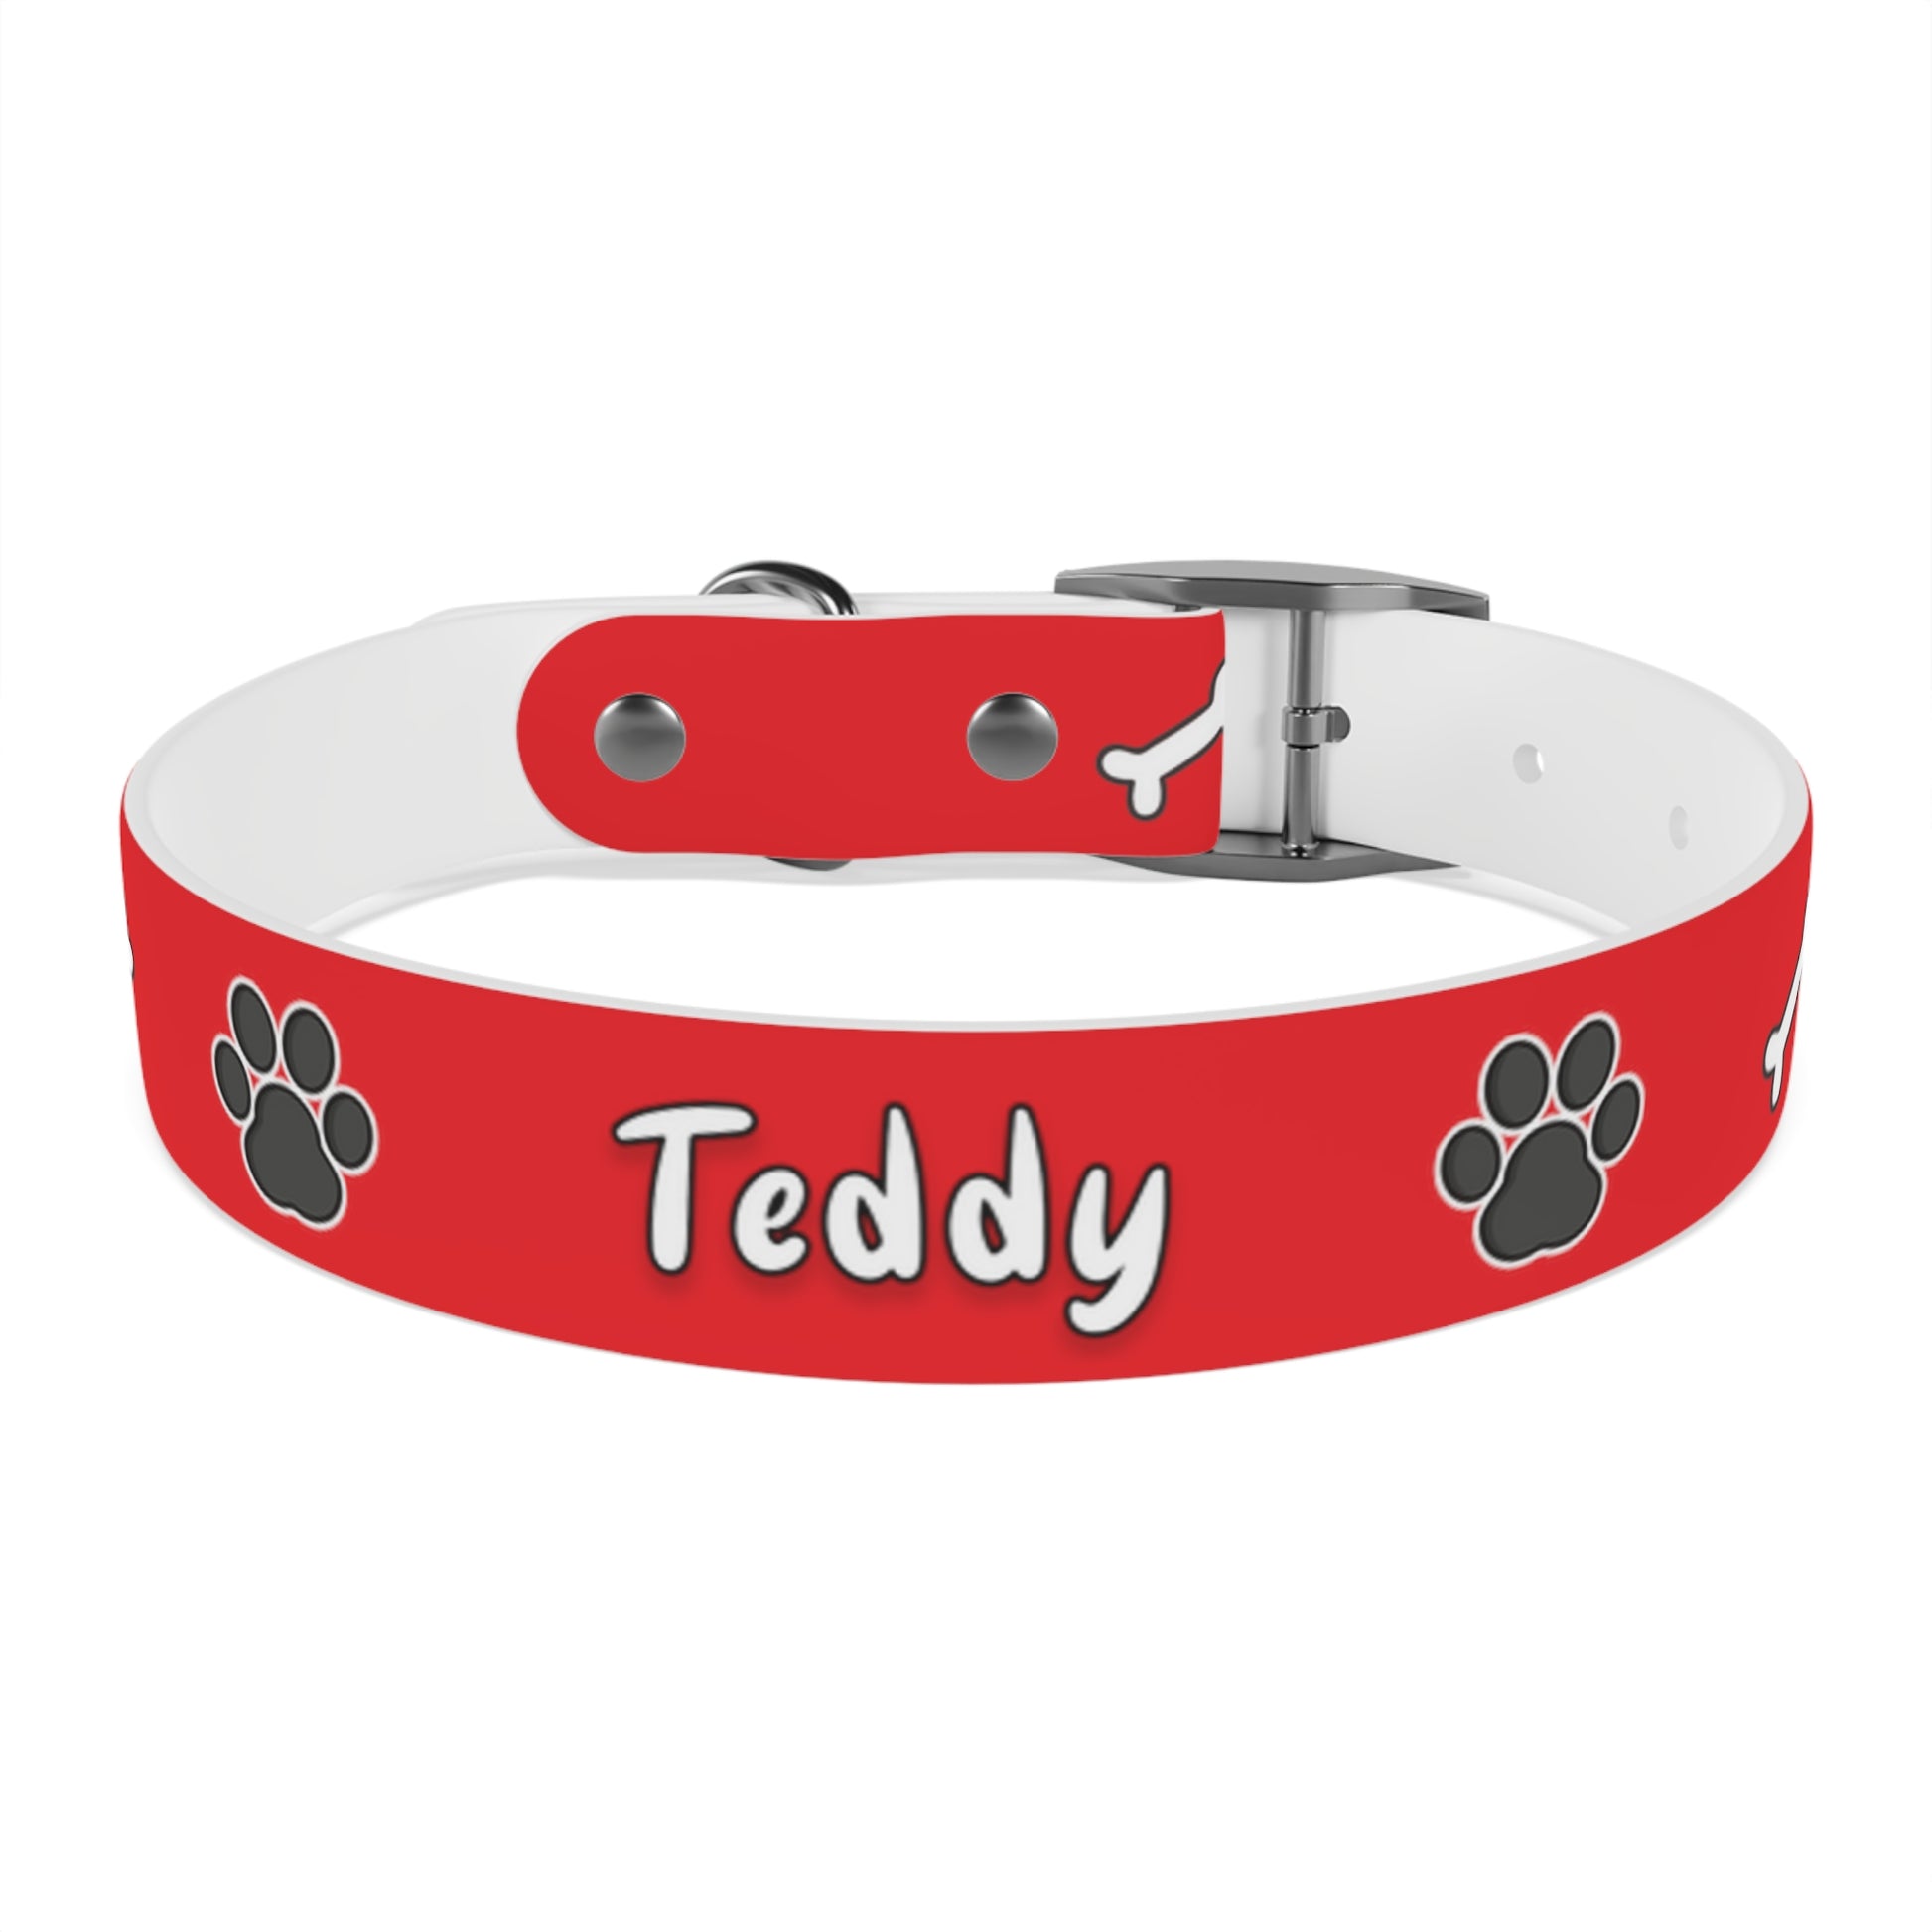 a dog collar with dog bones and paws design. The name of the dog is in the middle of the pet collar.  The dog collar color is red